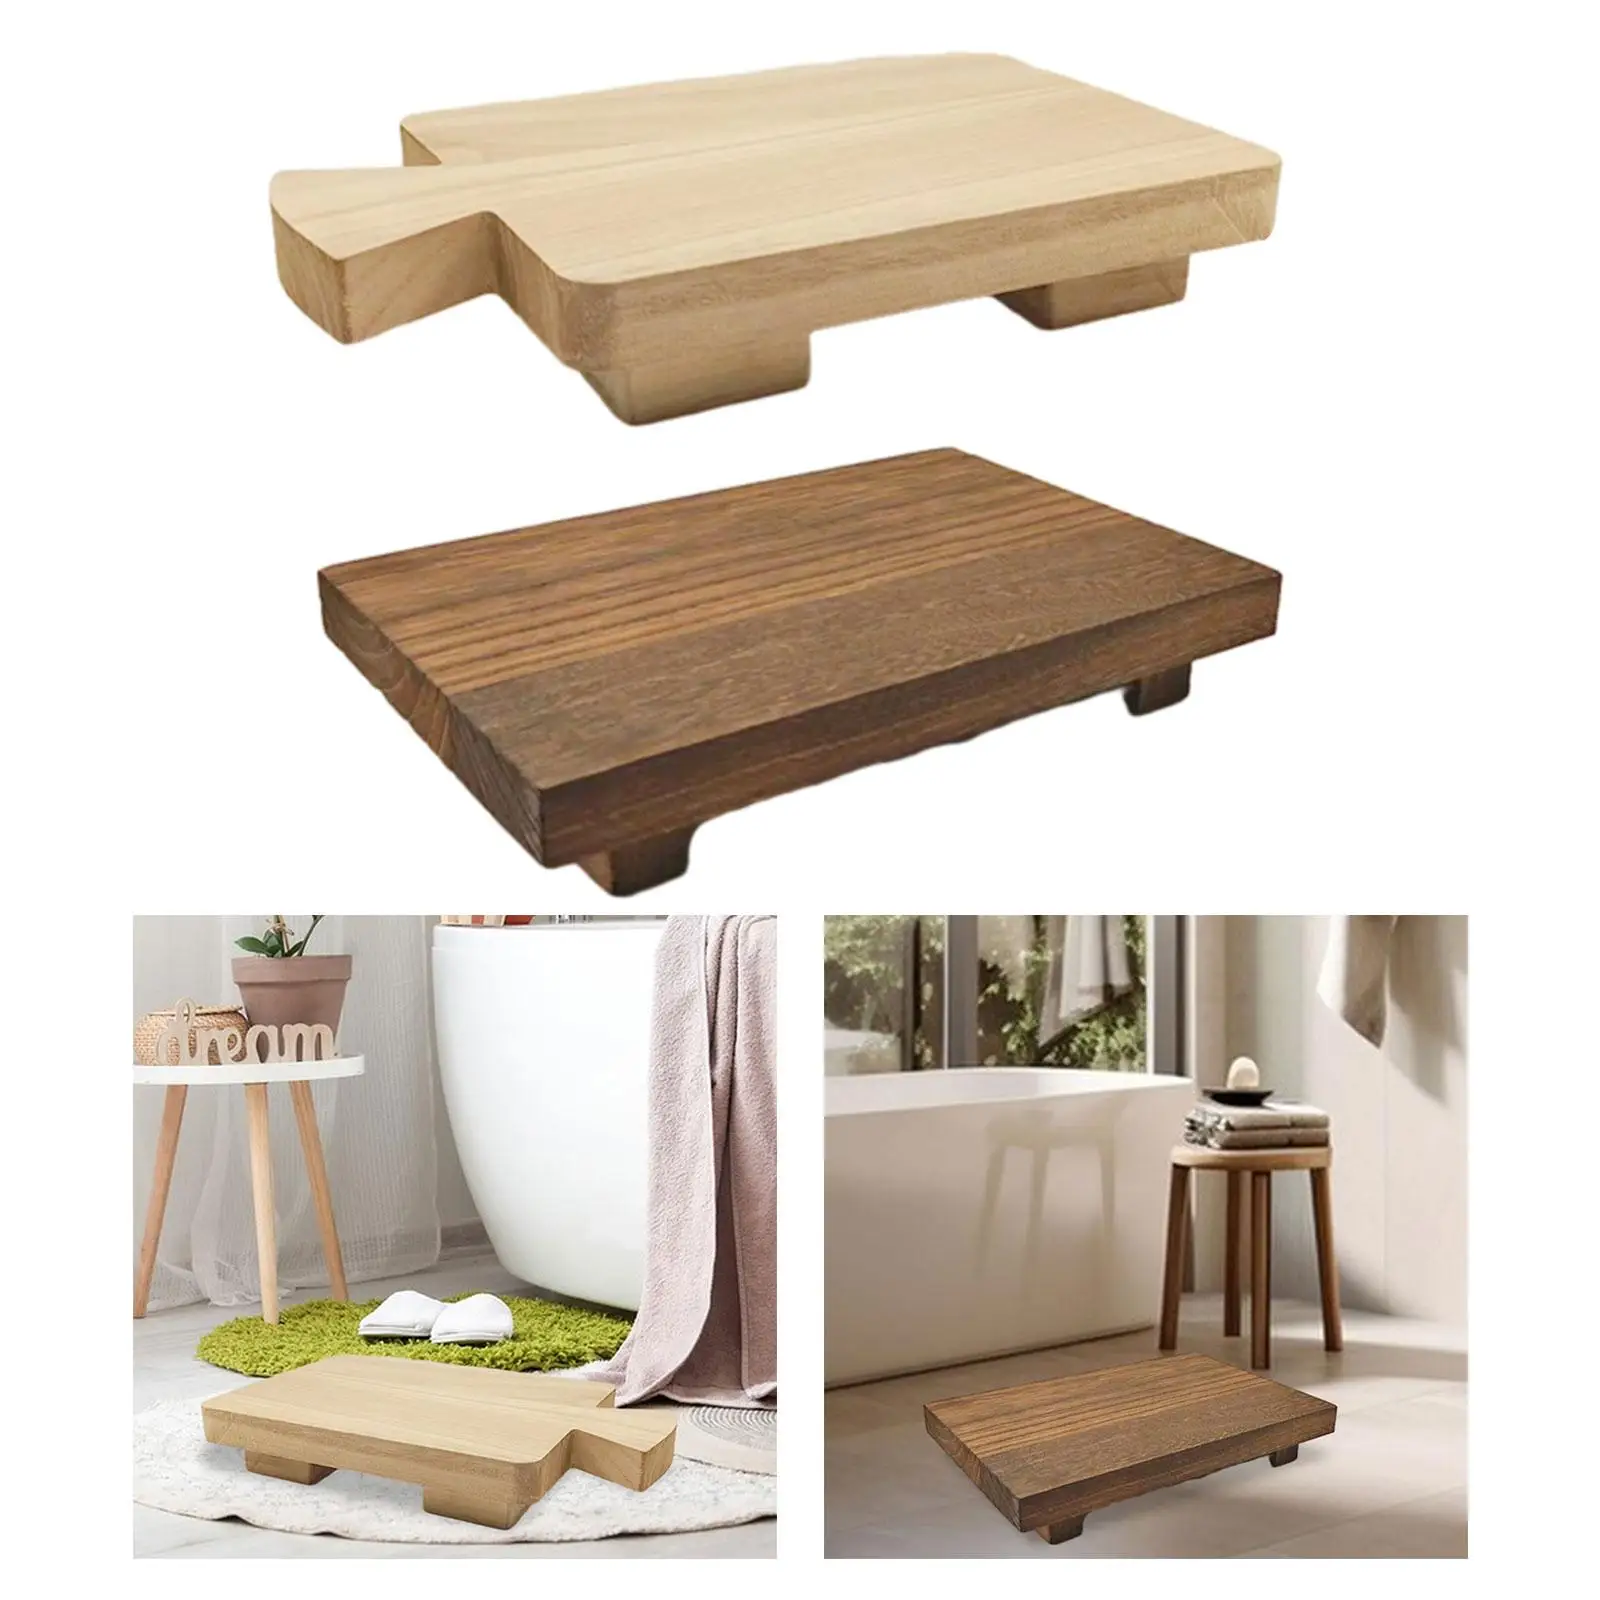 Wooden Pedestal Stand Footed Tray for Kitchen Counter Bathroom Coffee Table